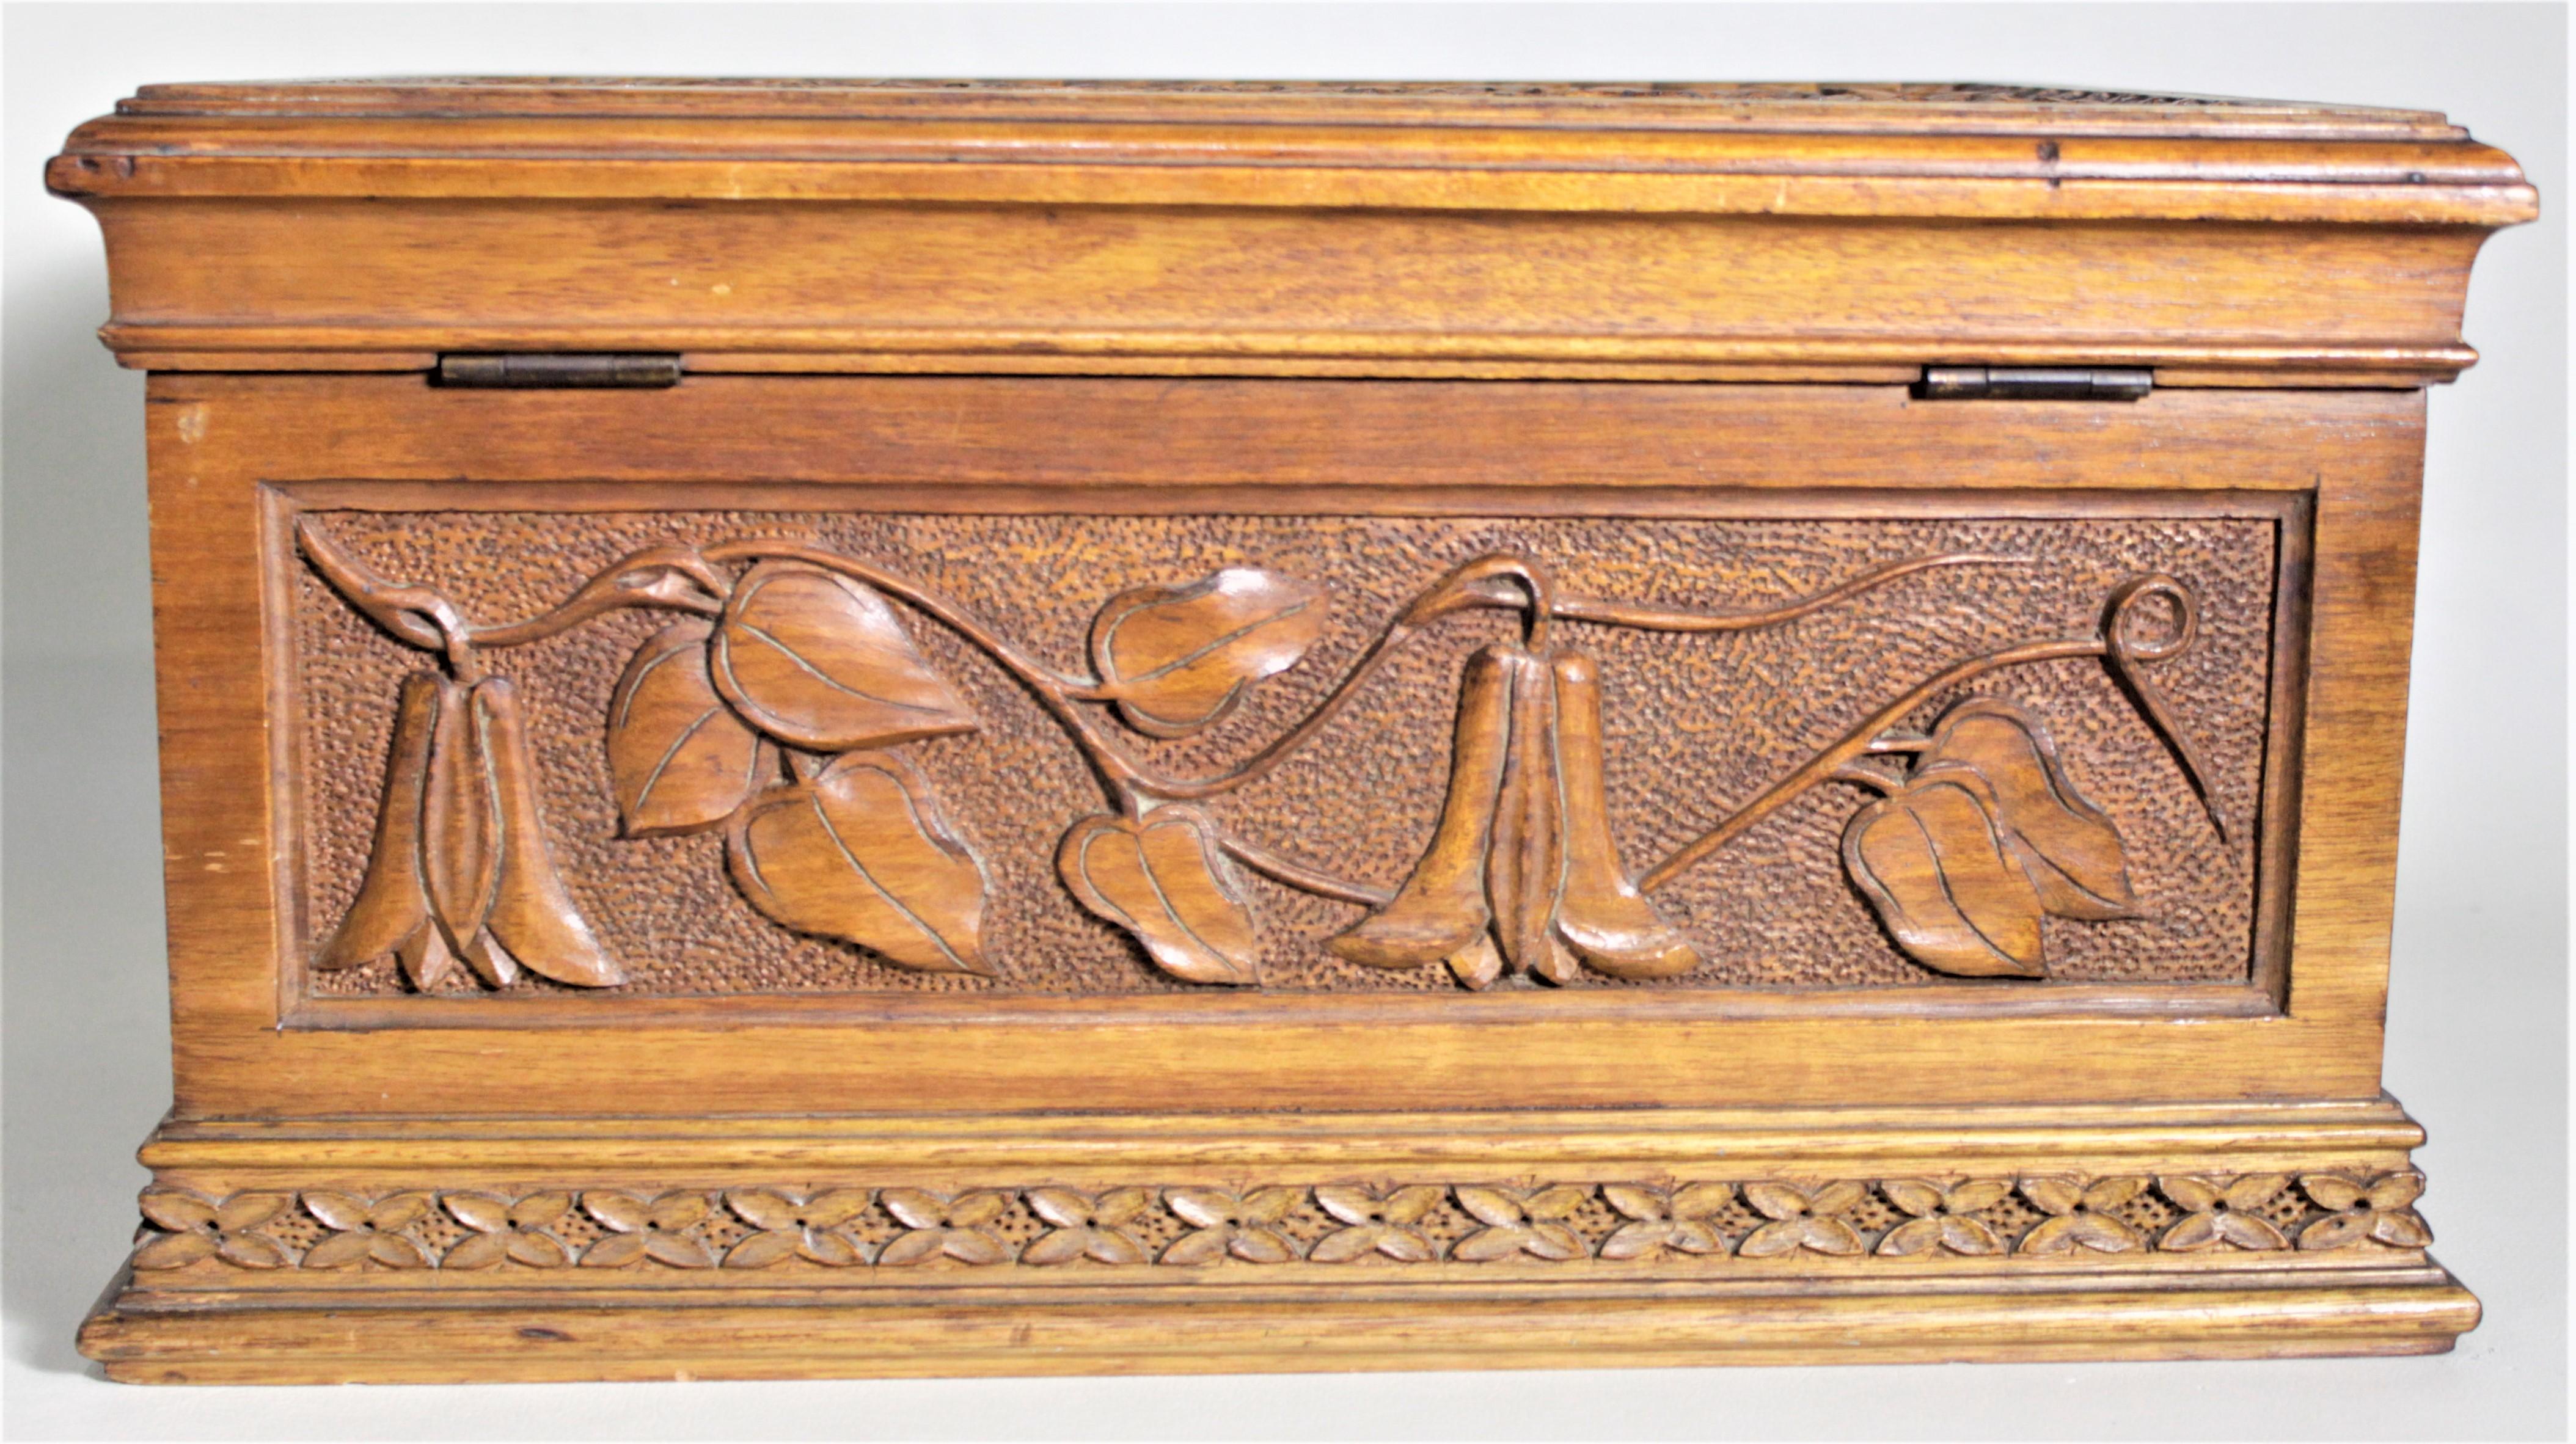 Art Nouveau Antique Hand Carved Wooden Jewelry Casket or Box with Ornate Floral Decoration